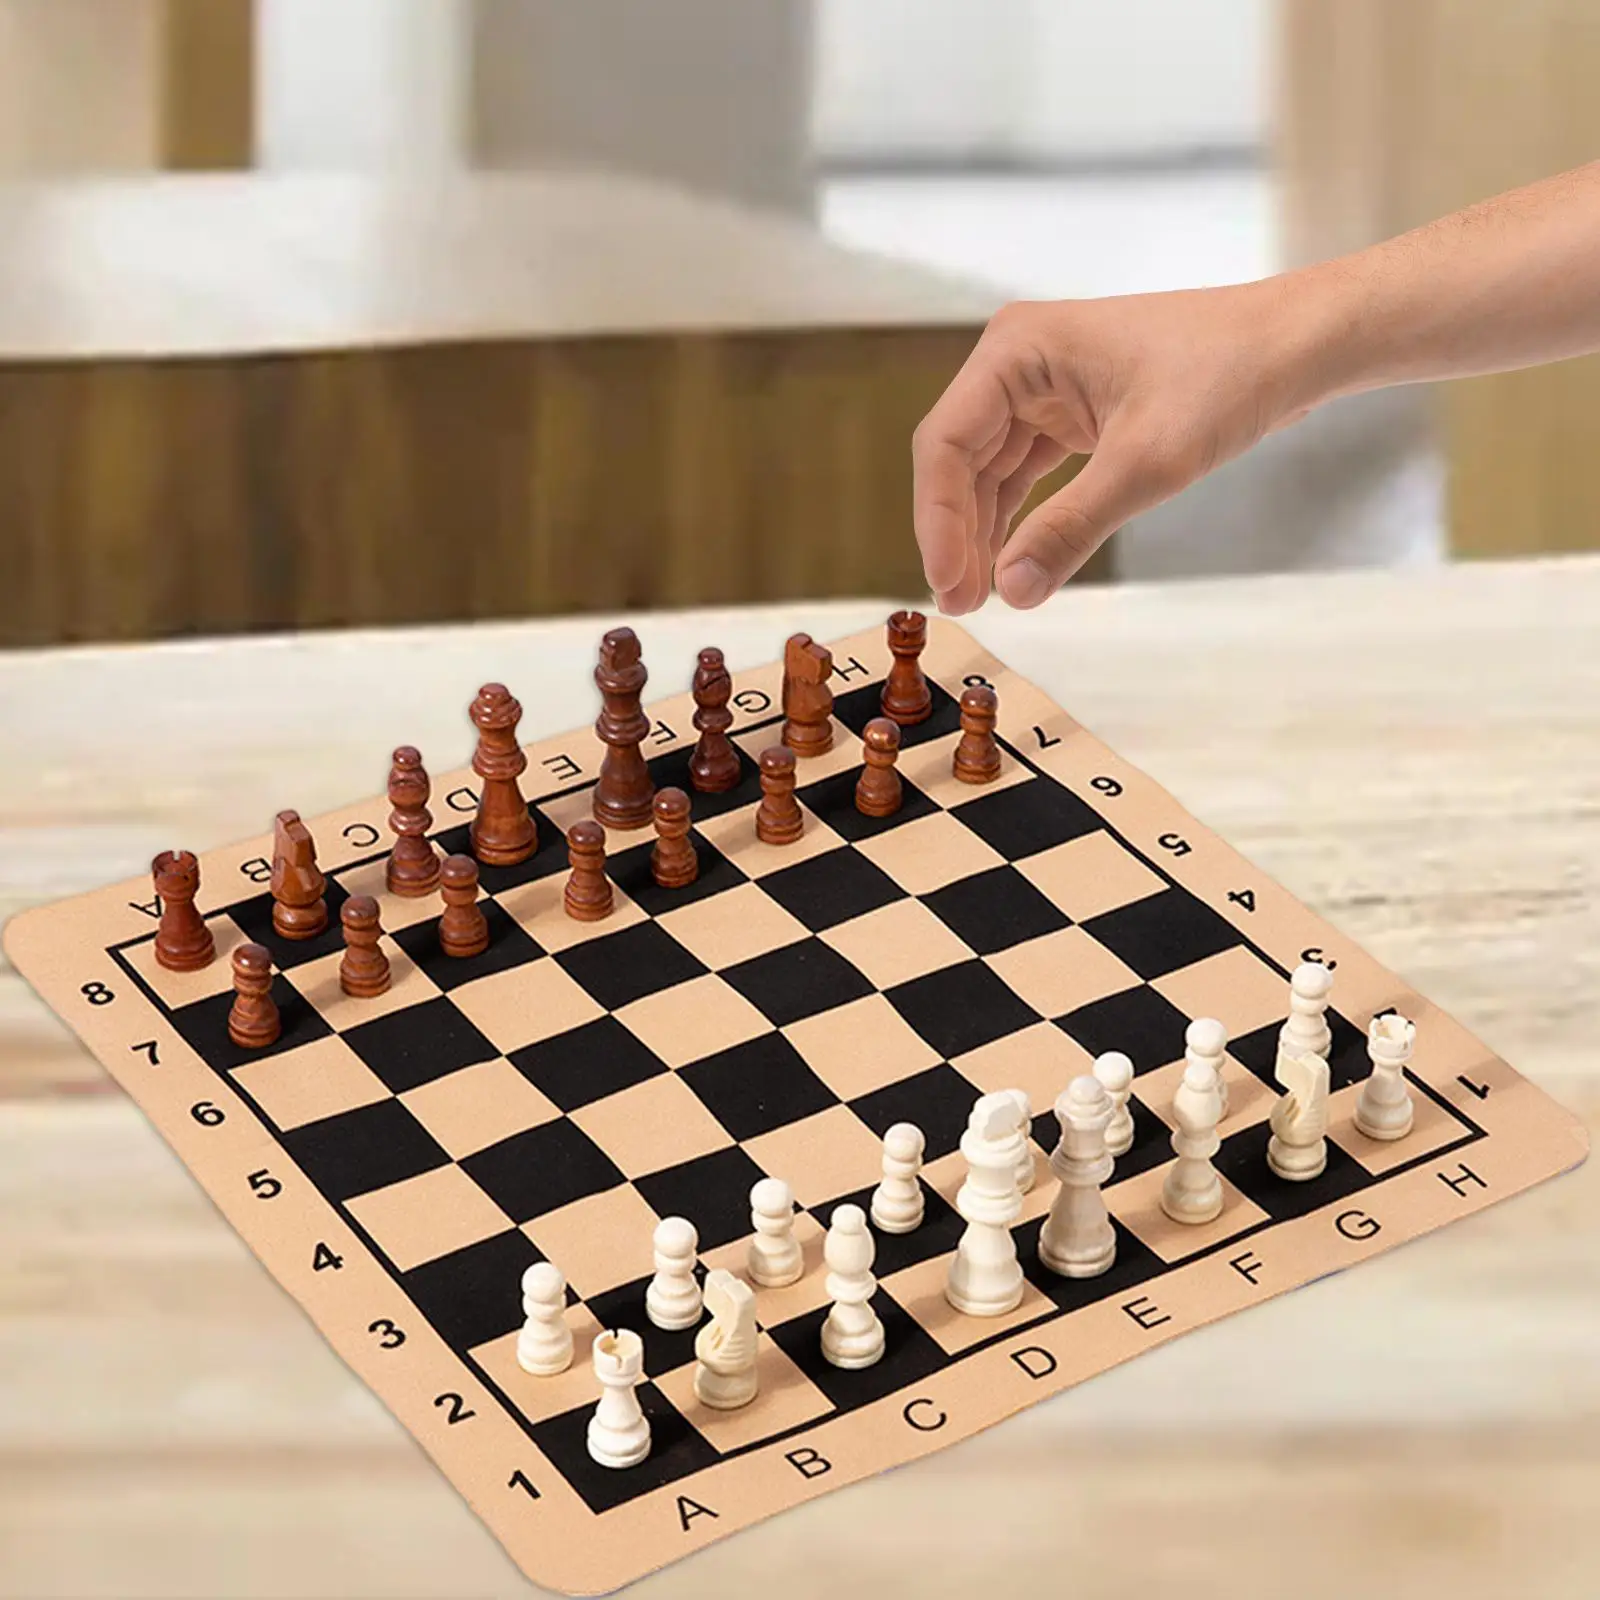 Portable Chess Set Educational Classic Table Strategy Game for Party Leisure